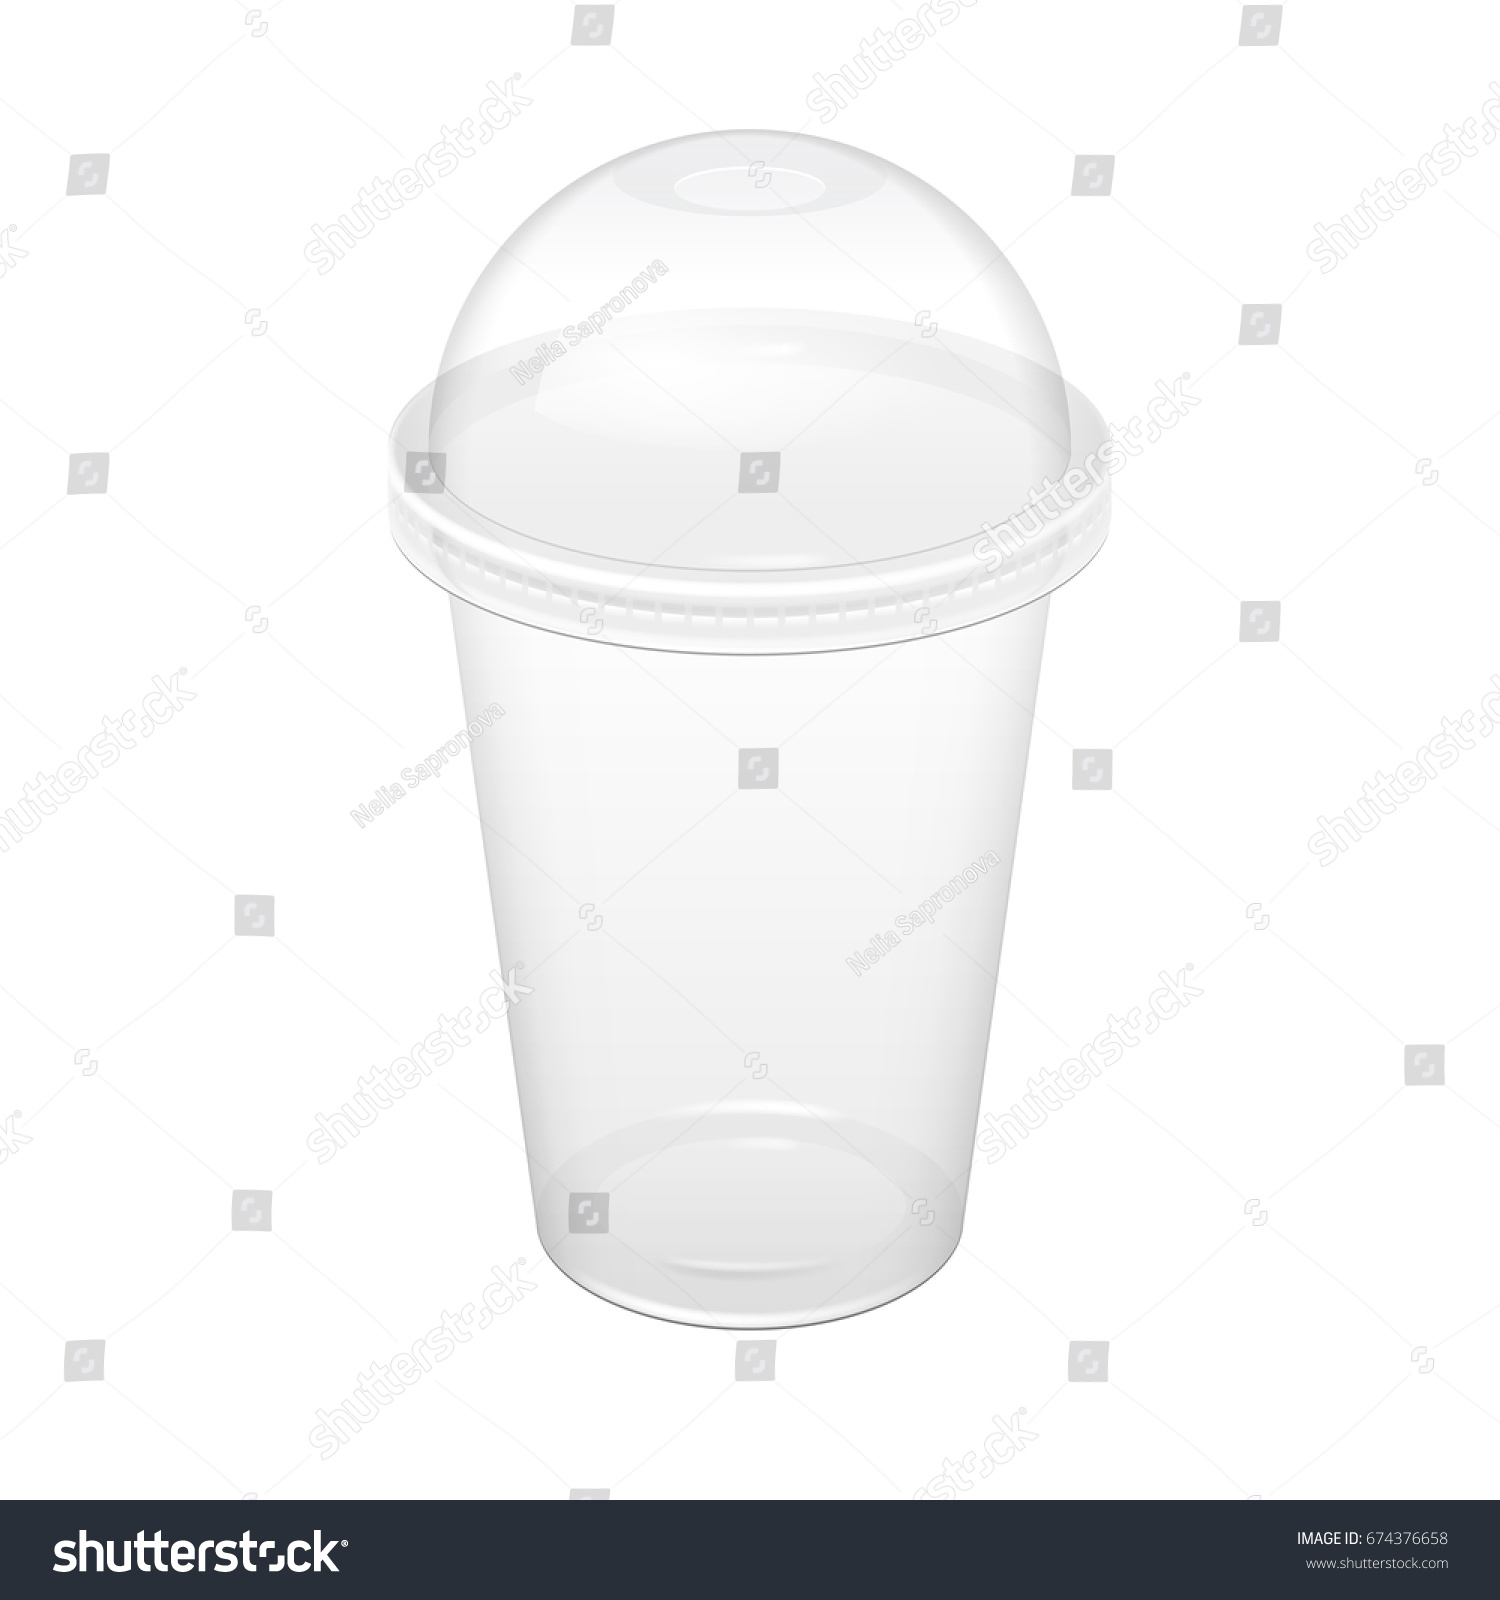 SVG of Realistic Transparent Disposable Plastic Cup With Lid. For various drinks, lemonade, fresh, coffee or ice cream. Mock up for brand template. vector illustration. svg